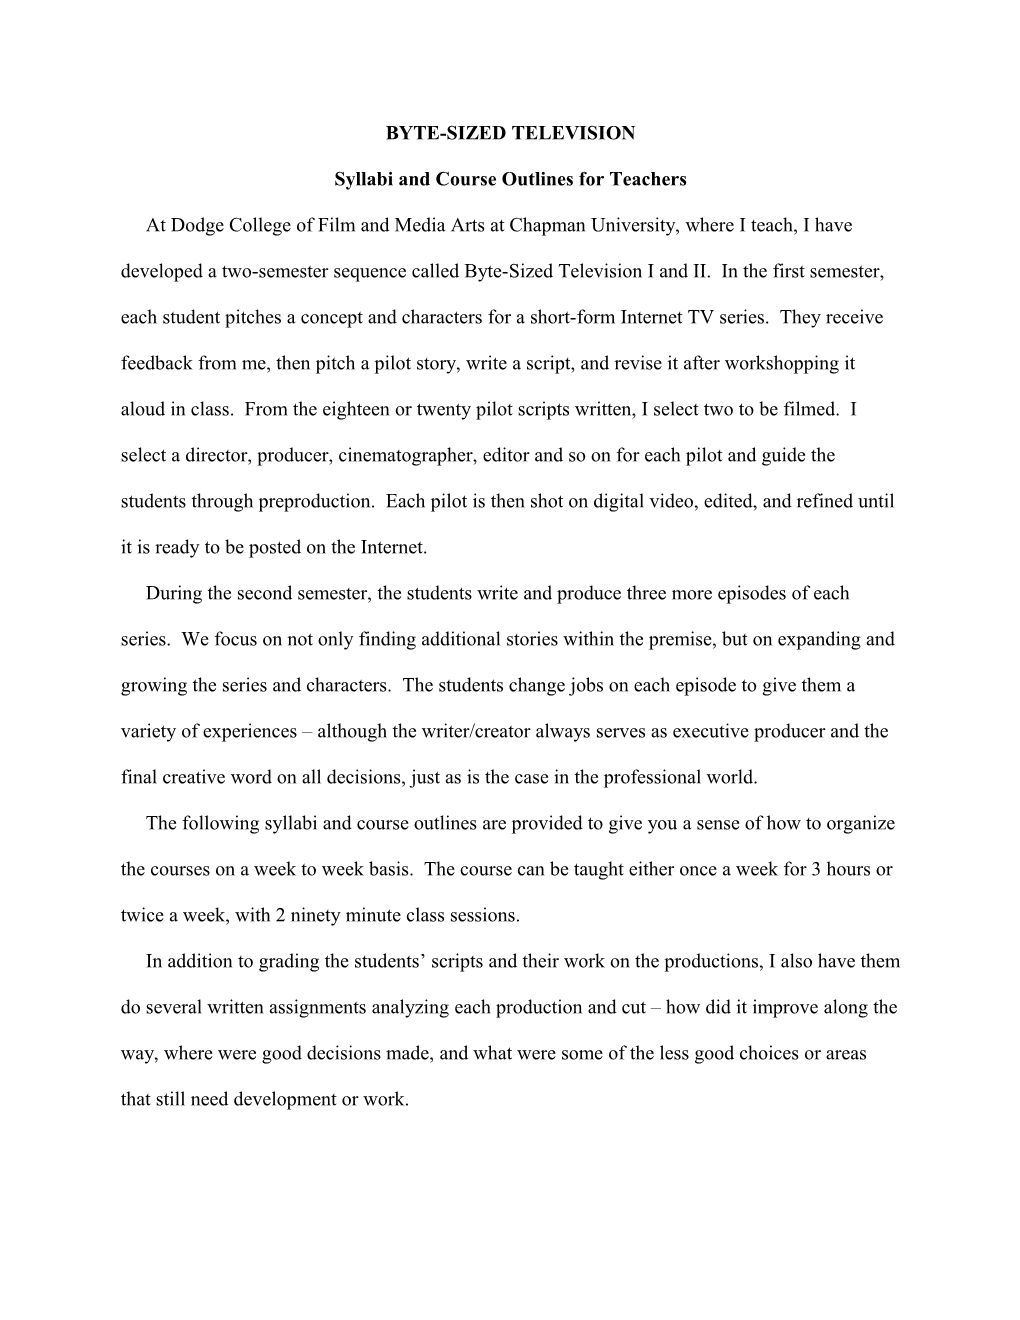 Syllabi and Course Outlines for Teachers